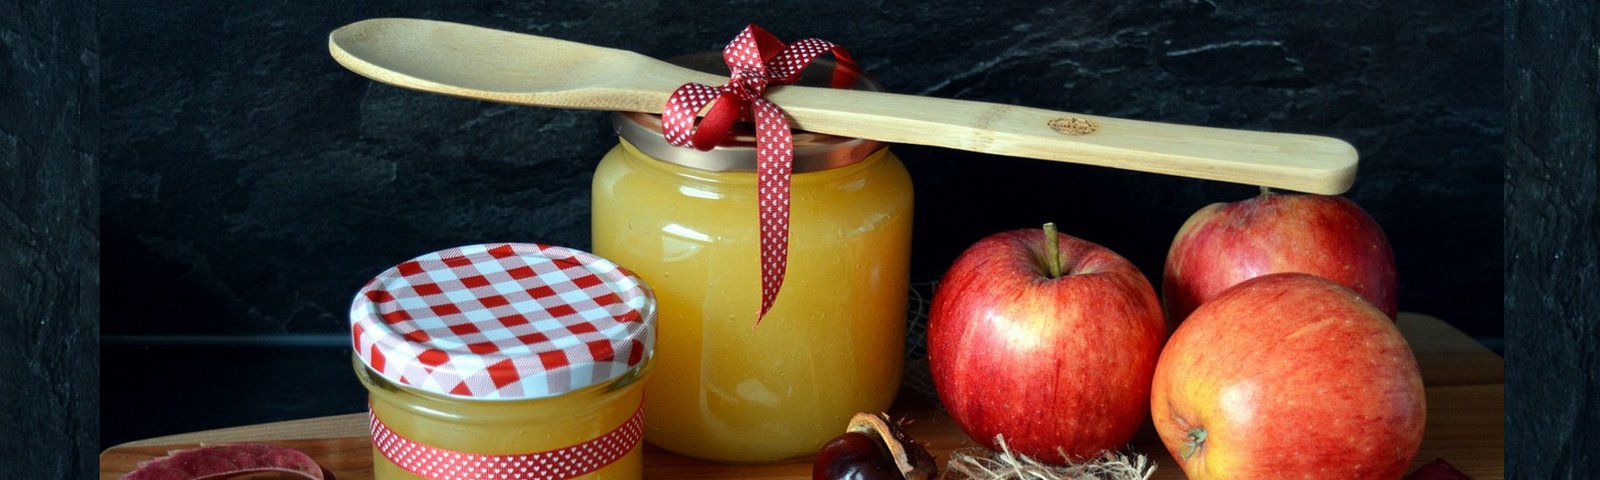 The makings of applesauce are arranged neatly on a wooden cutting board, including reddish-yellow apples, jars of chunky yellow sauce, a wooden spoon, with fall decor details like gingham ribbons around the spoon and one jar and as a pattern on the jar’s lid, two little wooden heart cut-outs, and a scrap of burlap.